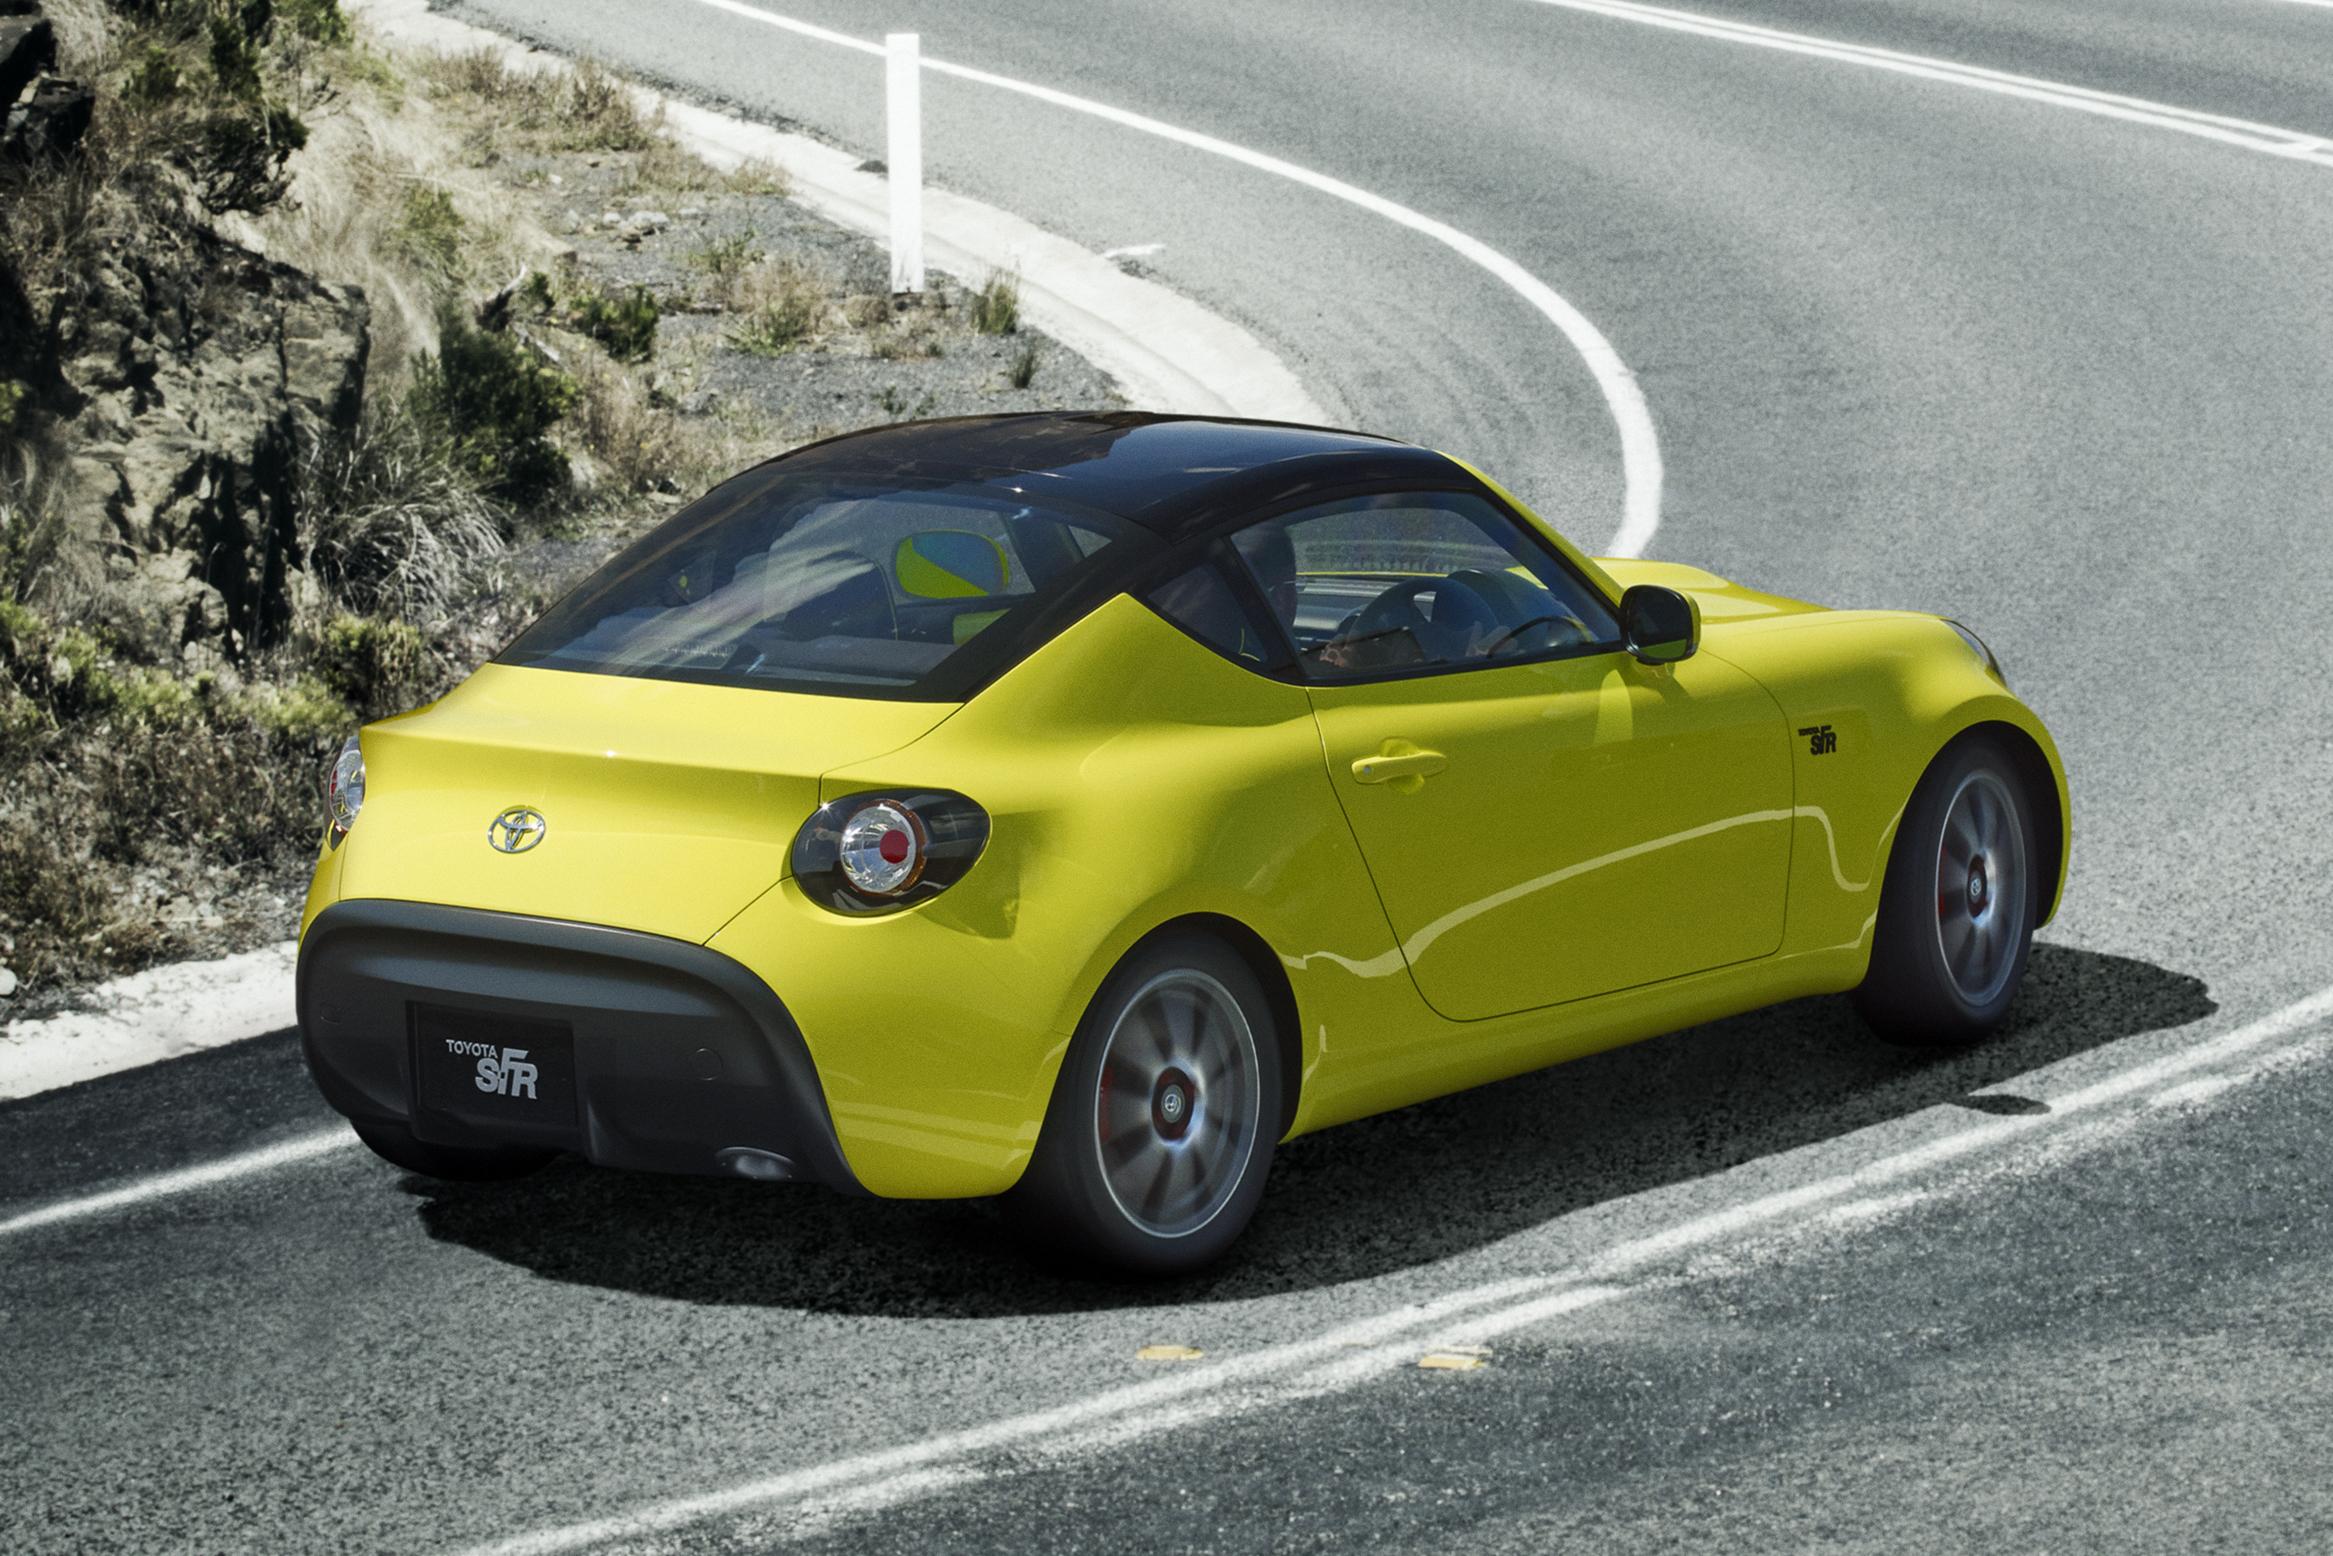 toyota’s next sports car to be roadster mazda mx-5 rival – report